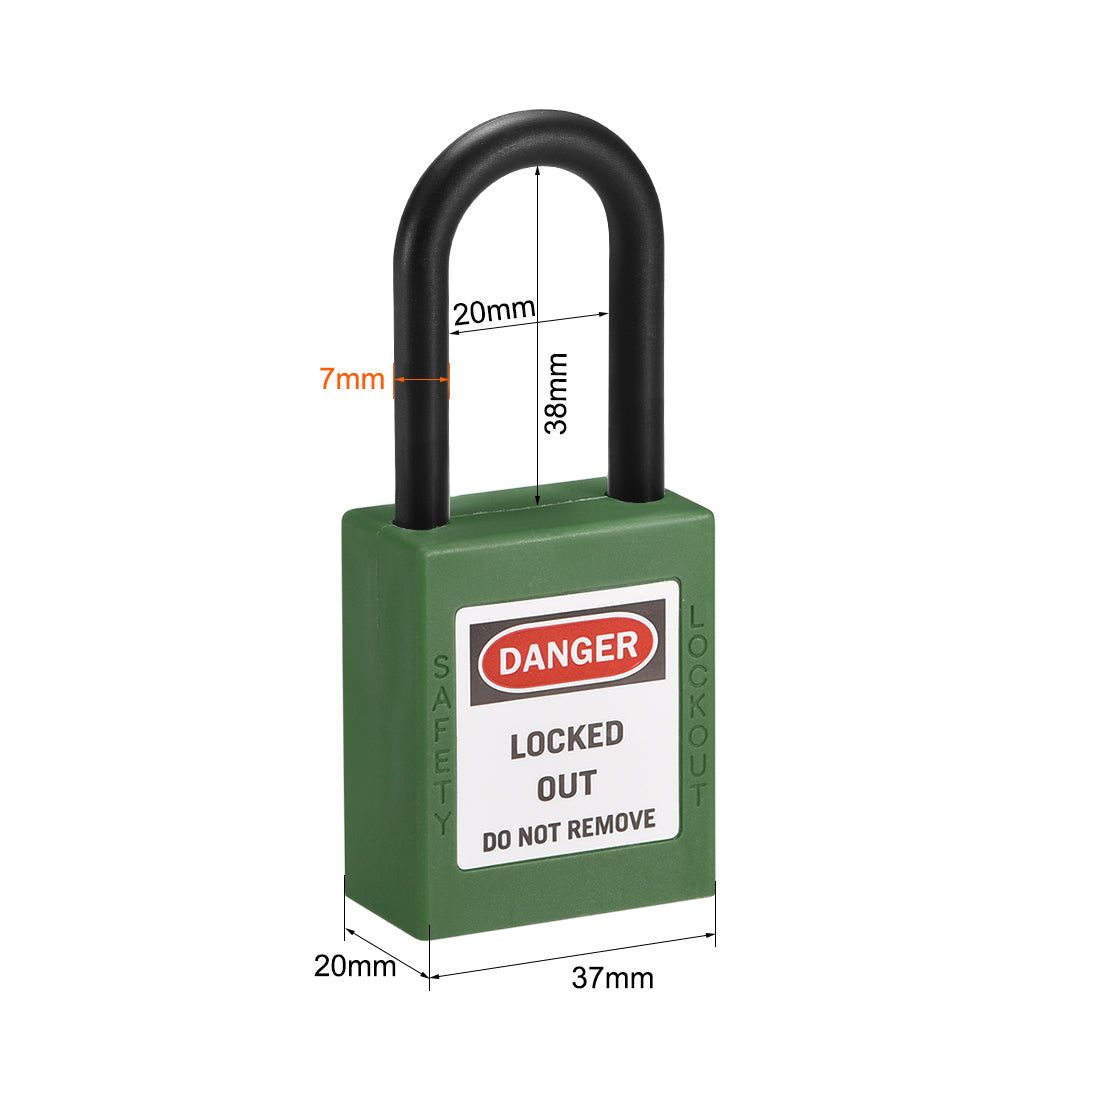 uxcell Uxcell Lockout Tagout Safety Padlock 38mm Nylon Shackle Keyed Different Green 2Pcs